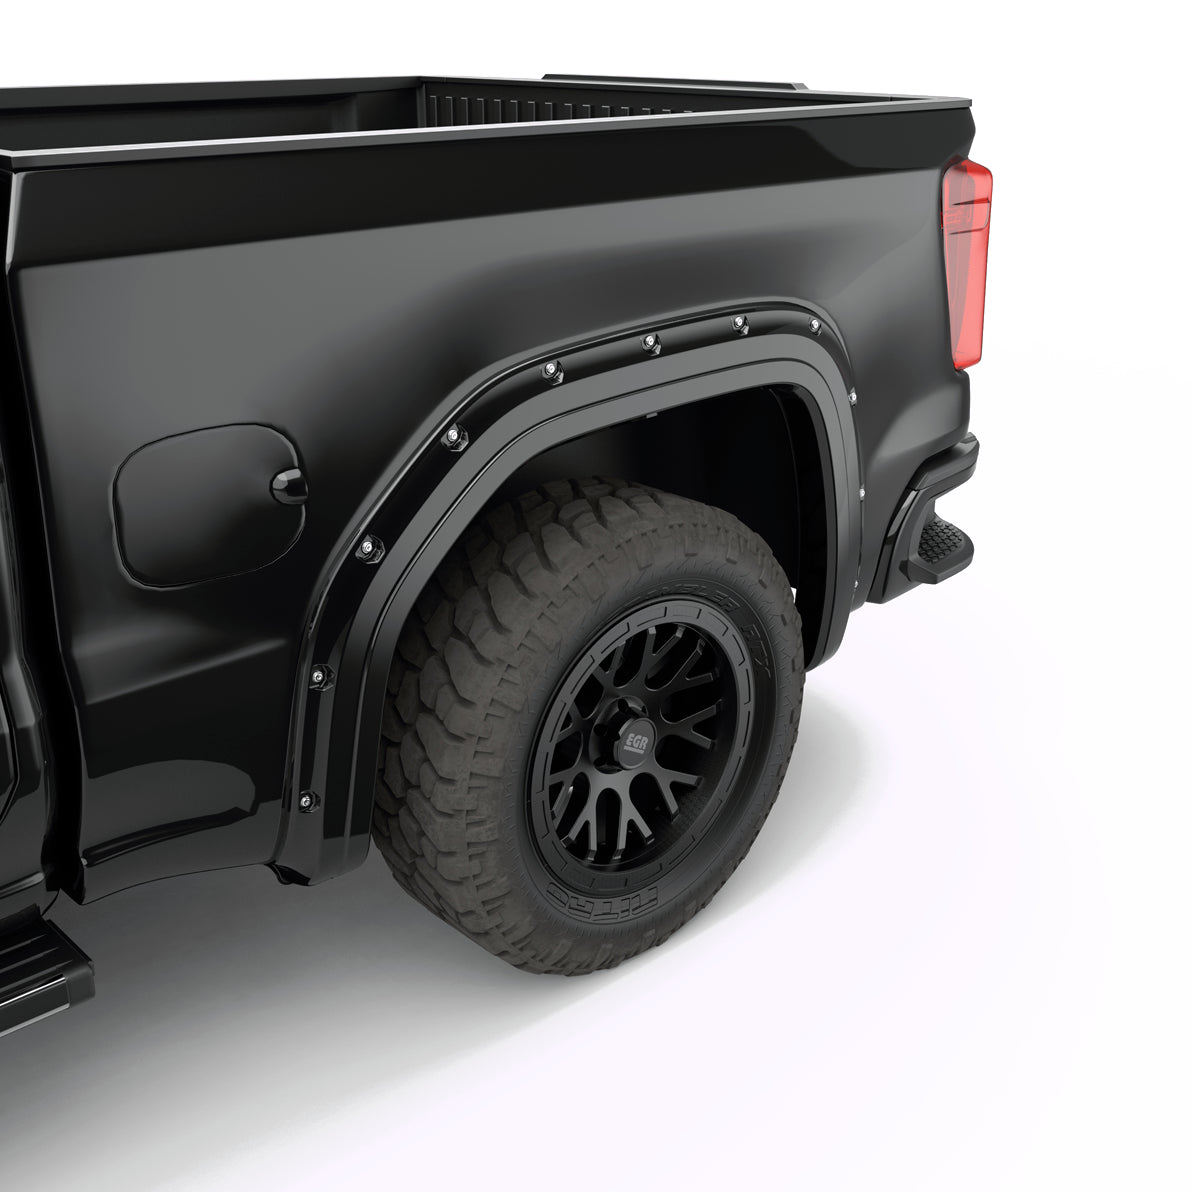 EGR Traditional Bolt-on look Fender Flares 19-22 GMC Sierra 1500 Painted to Code Black set of 4